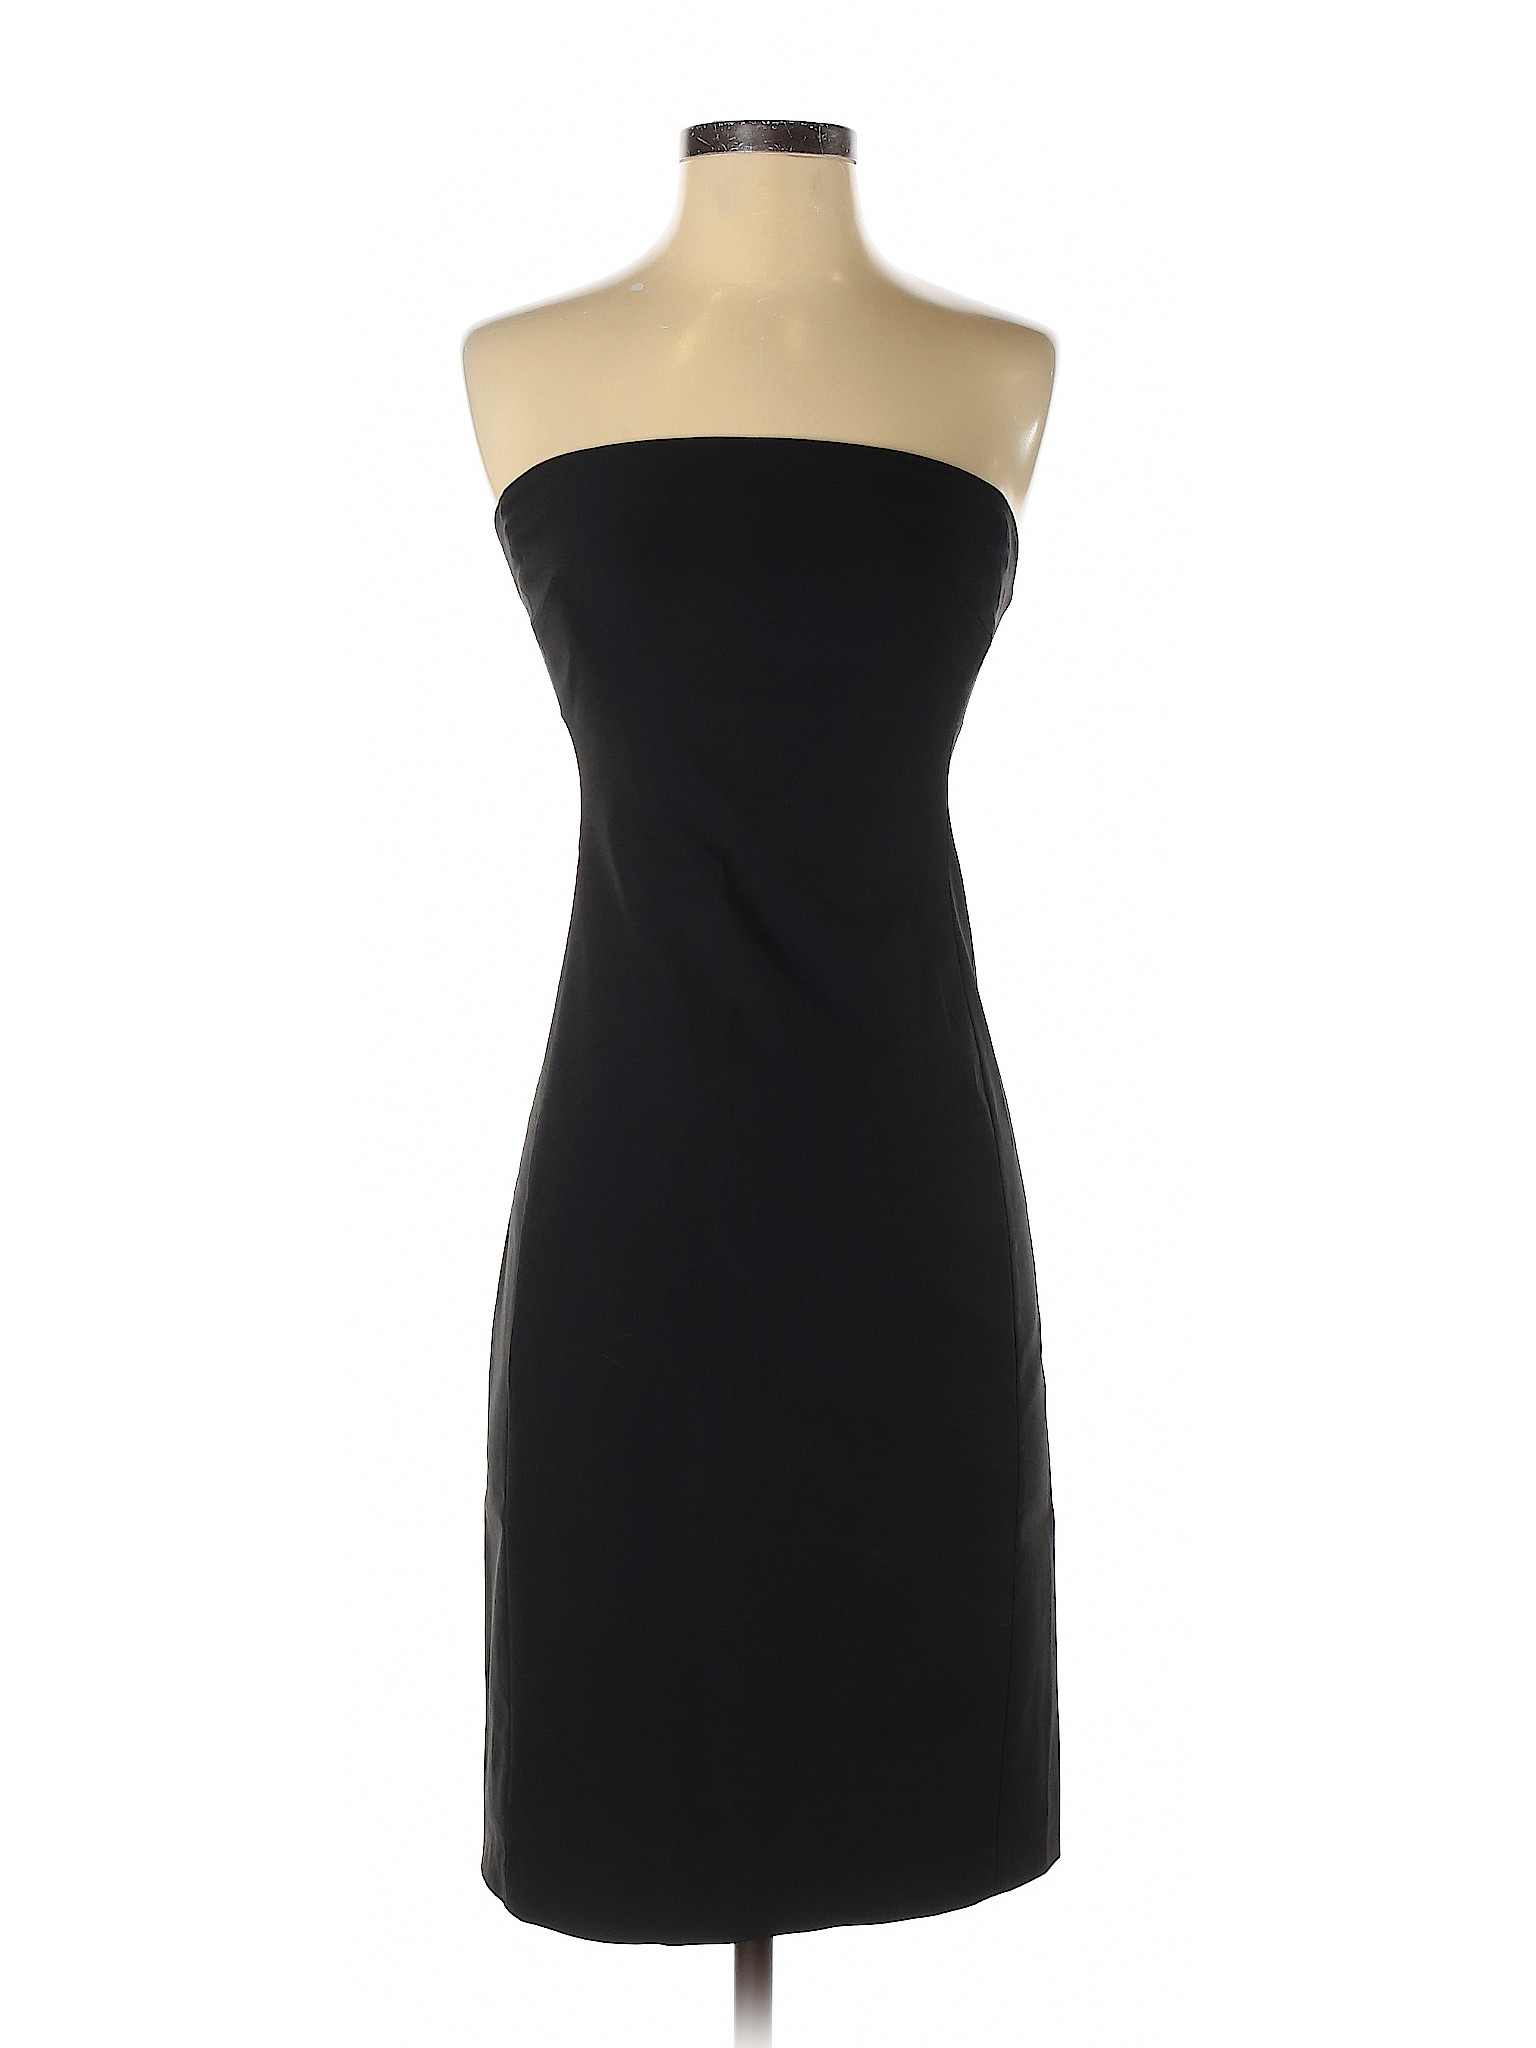 French Connection Women Black Cocktail Dress 4 | eBay